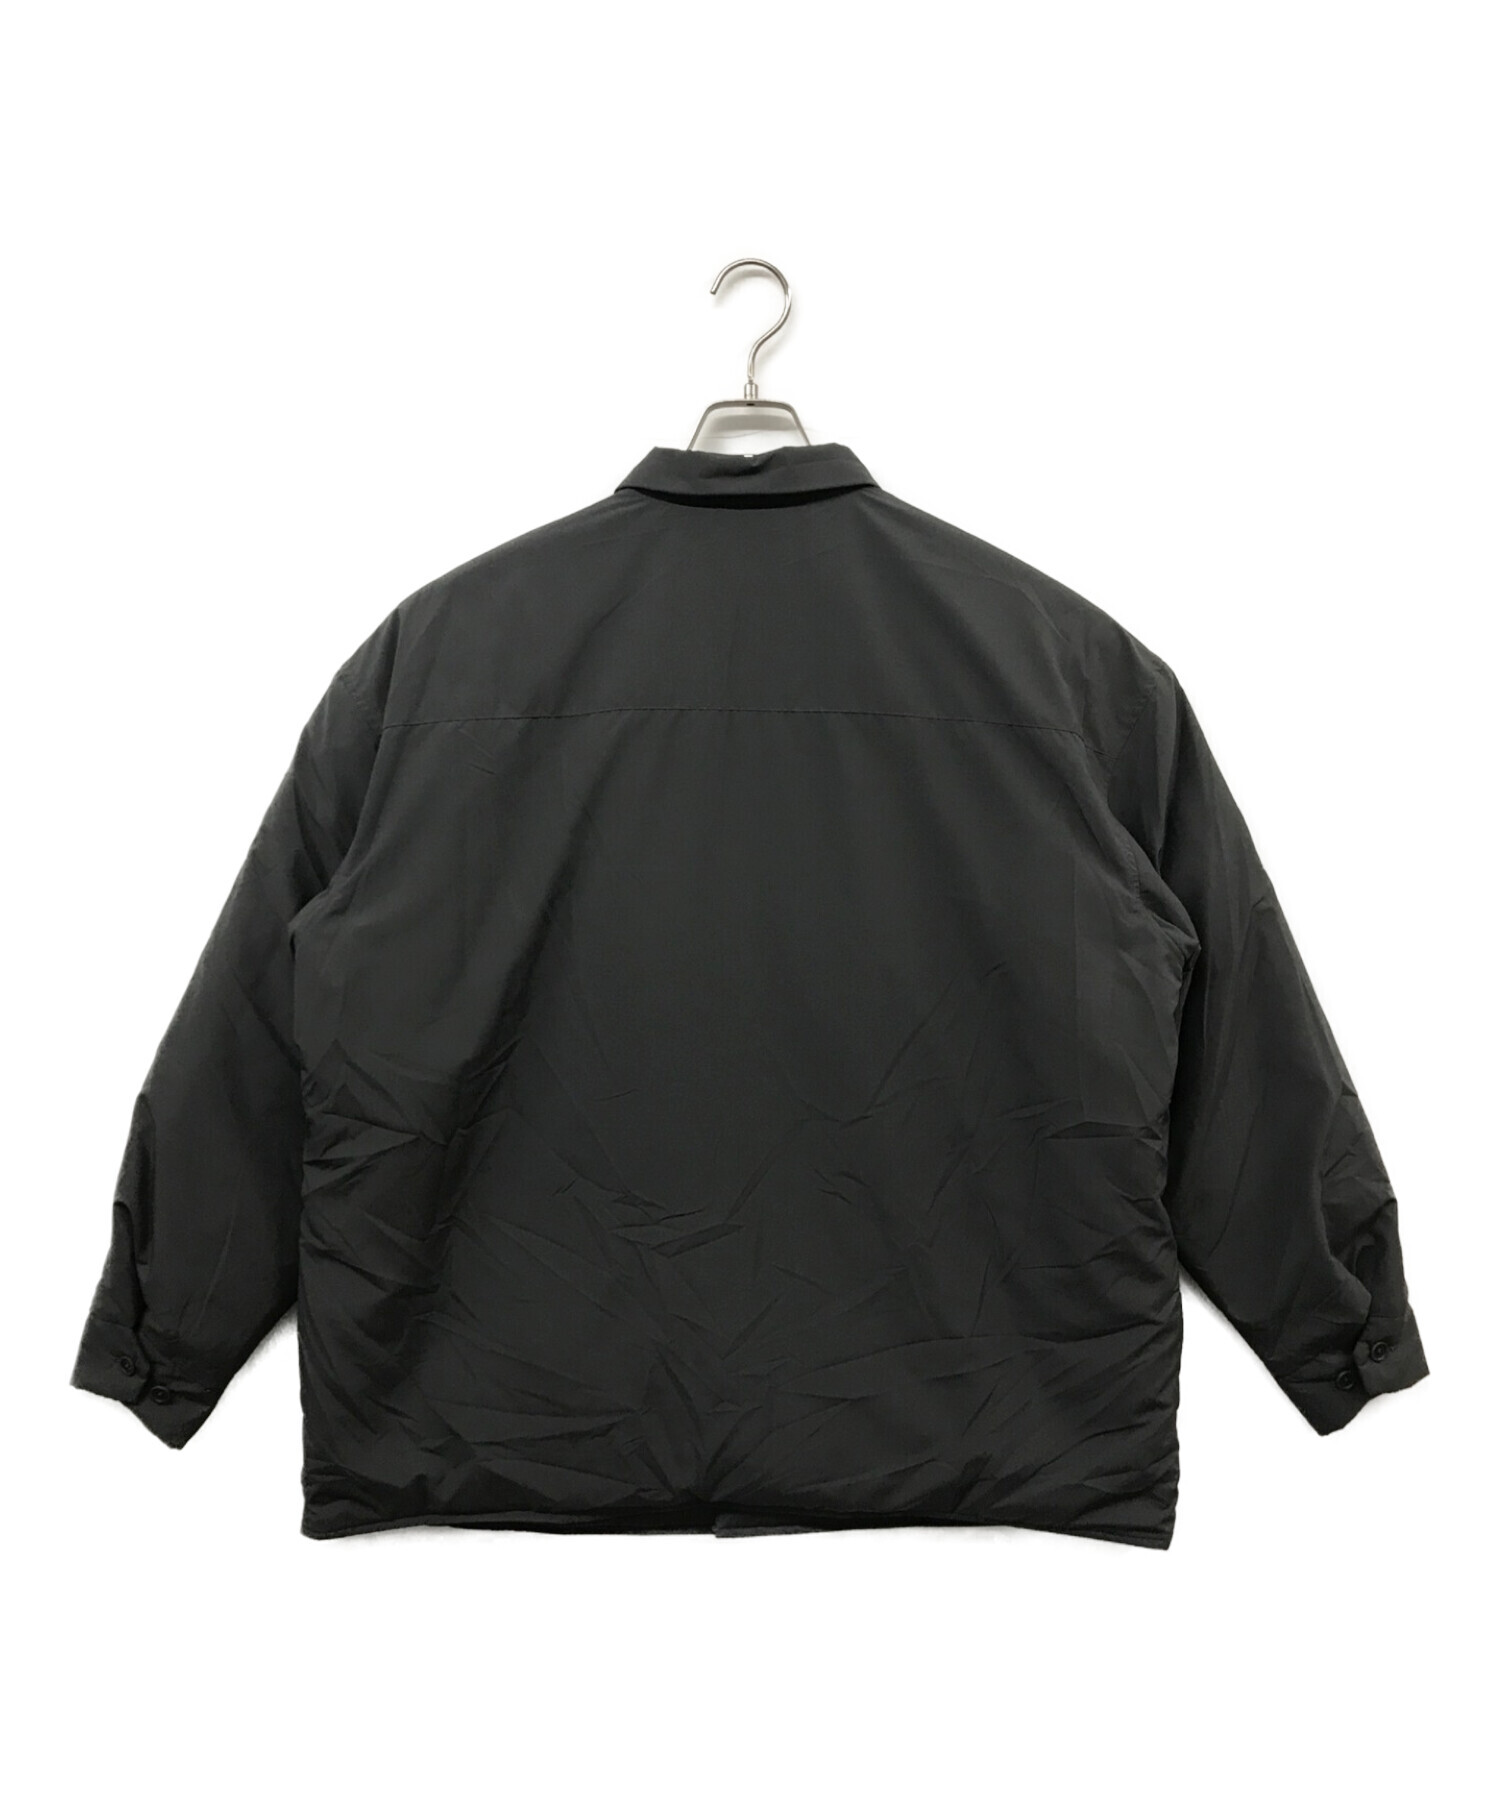 COOTIE PRODUCTIONS (クーティープロダクツ) Padded Error Fit Work Shirt Jacket グレー サイズ:Ｍ